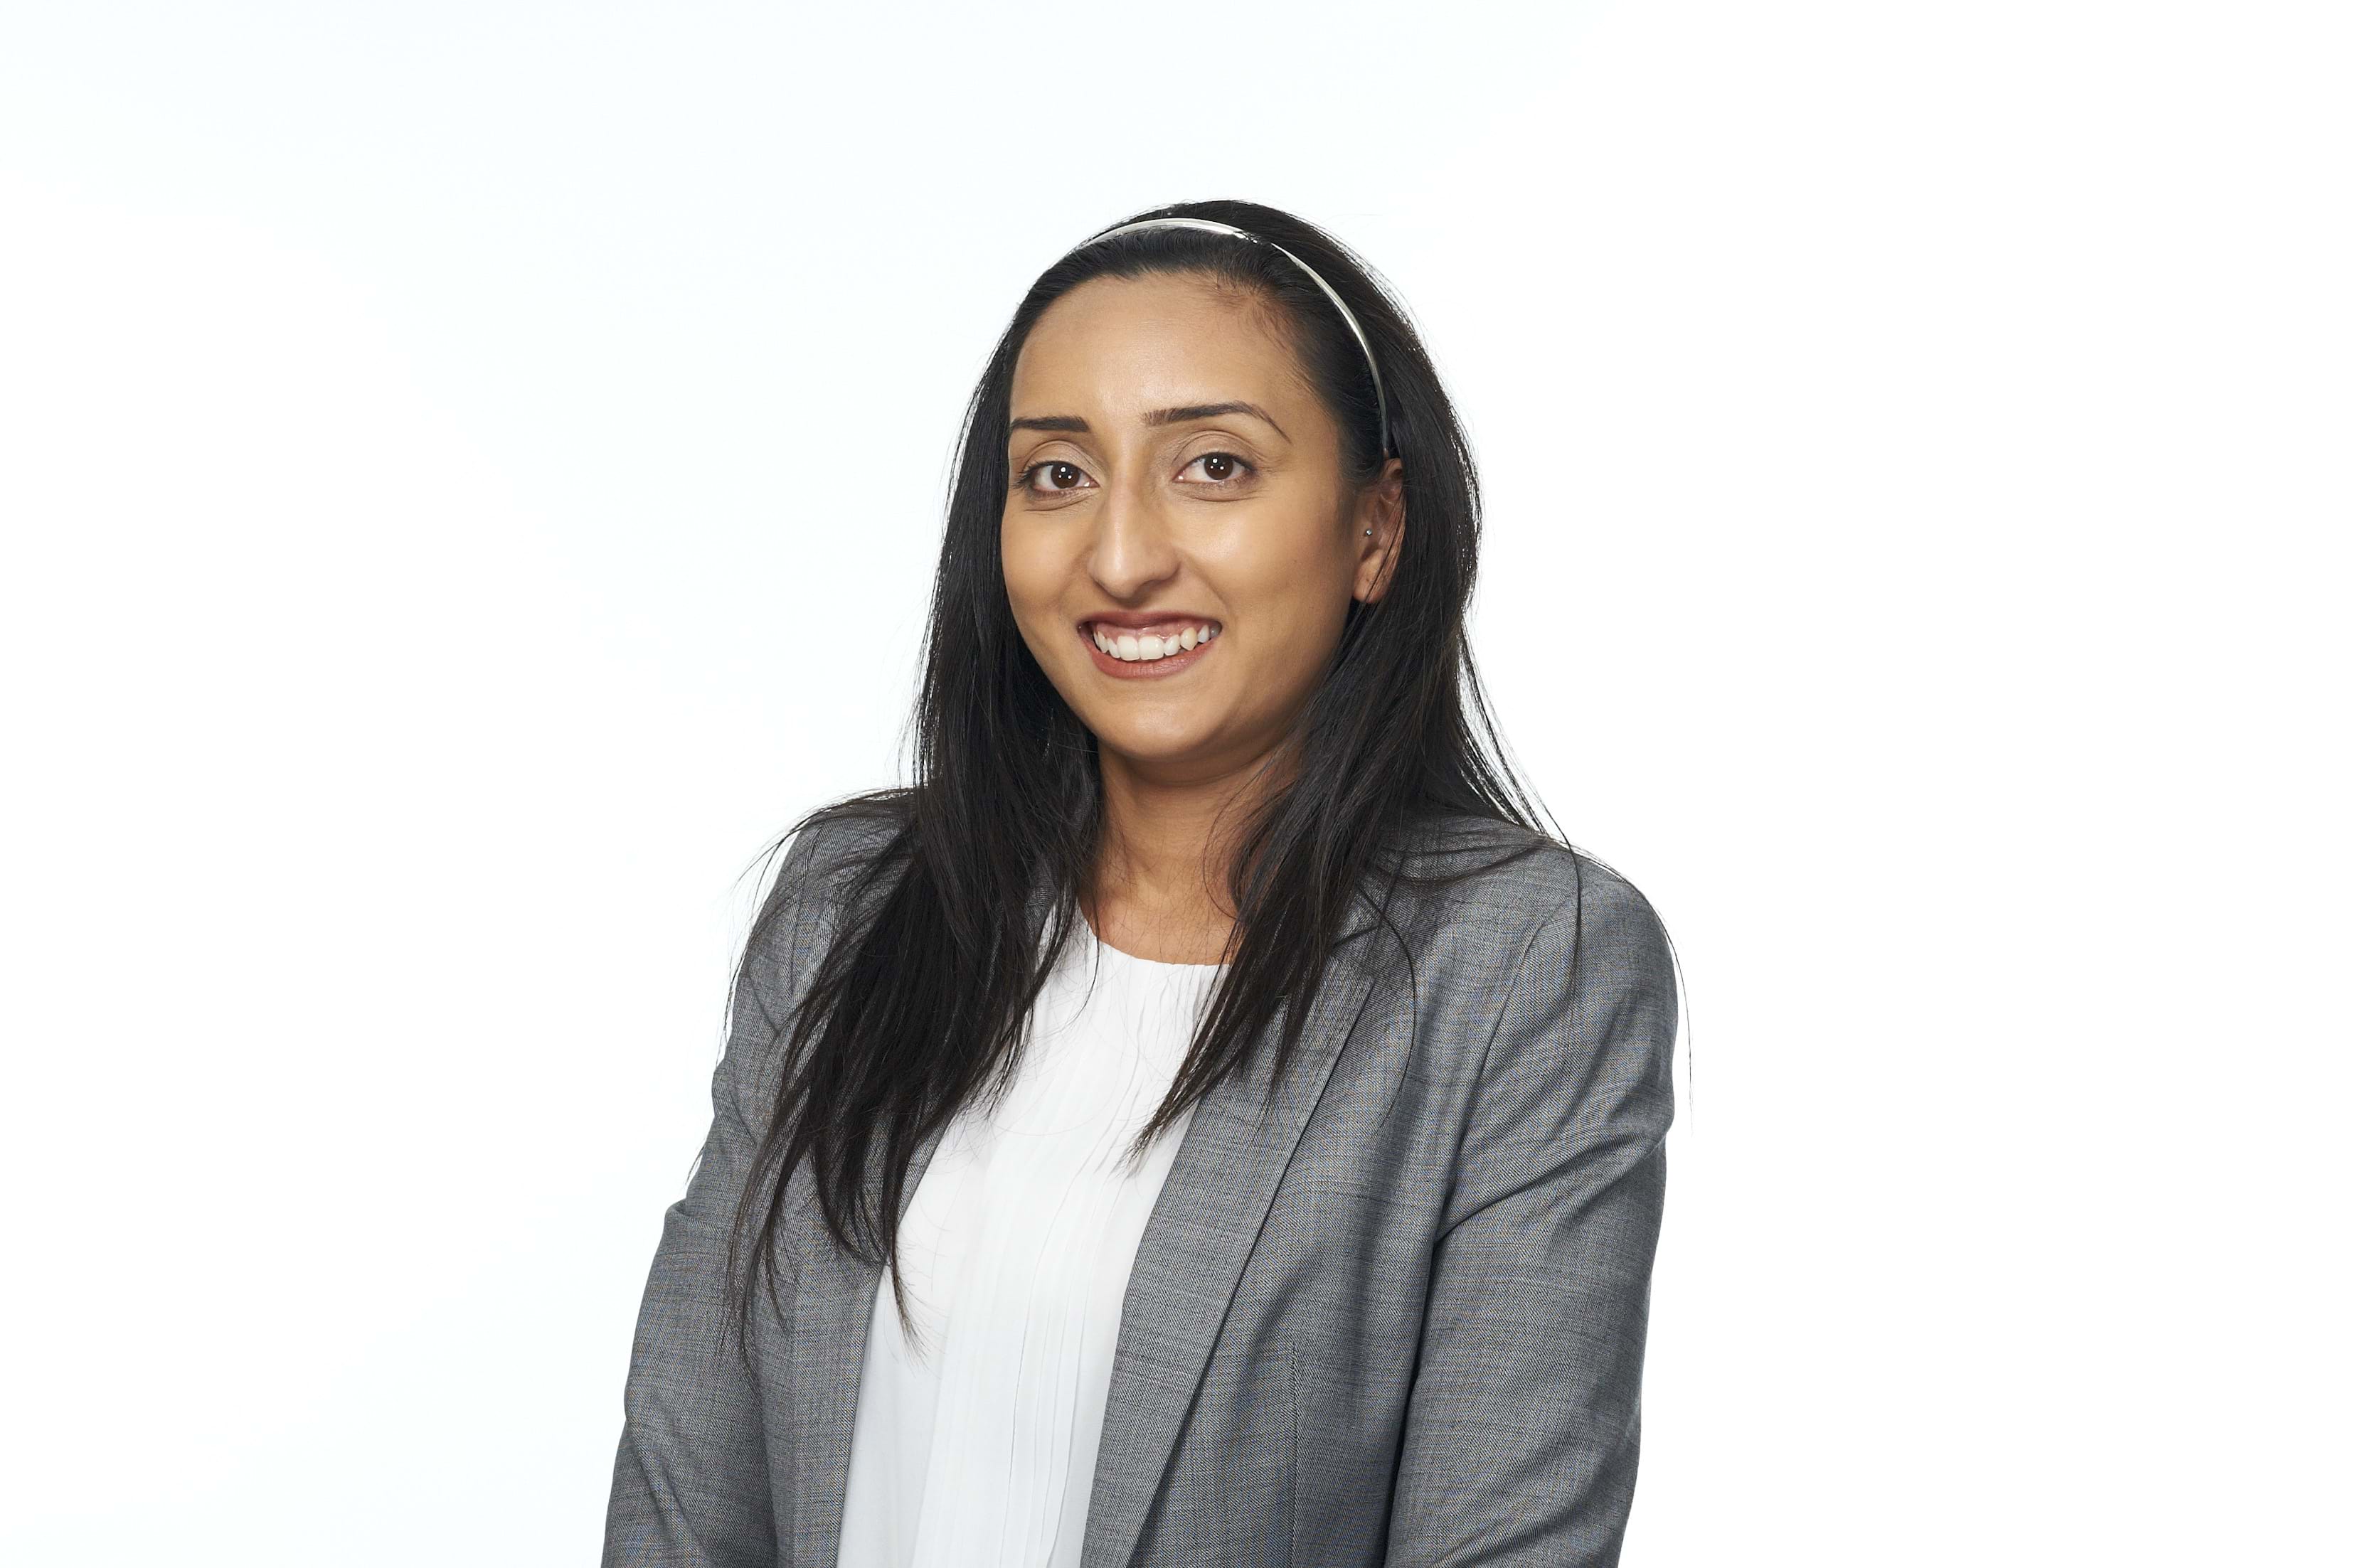 A profile of Harjinder Saundh, a member of the professional misconduct and criminal law team at Thompsons Solicitors